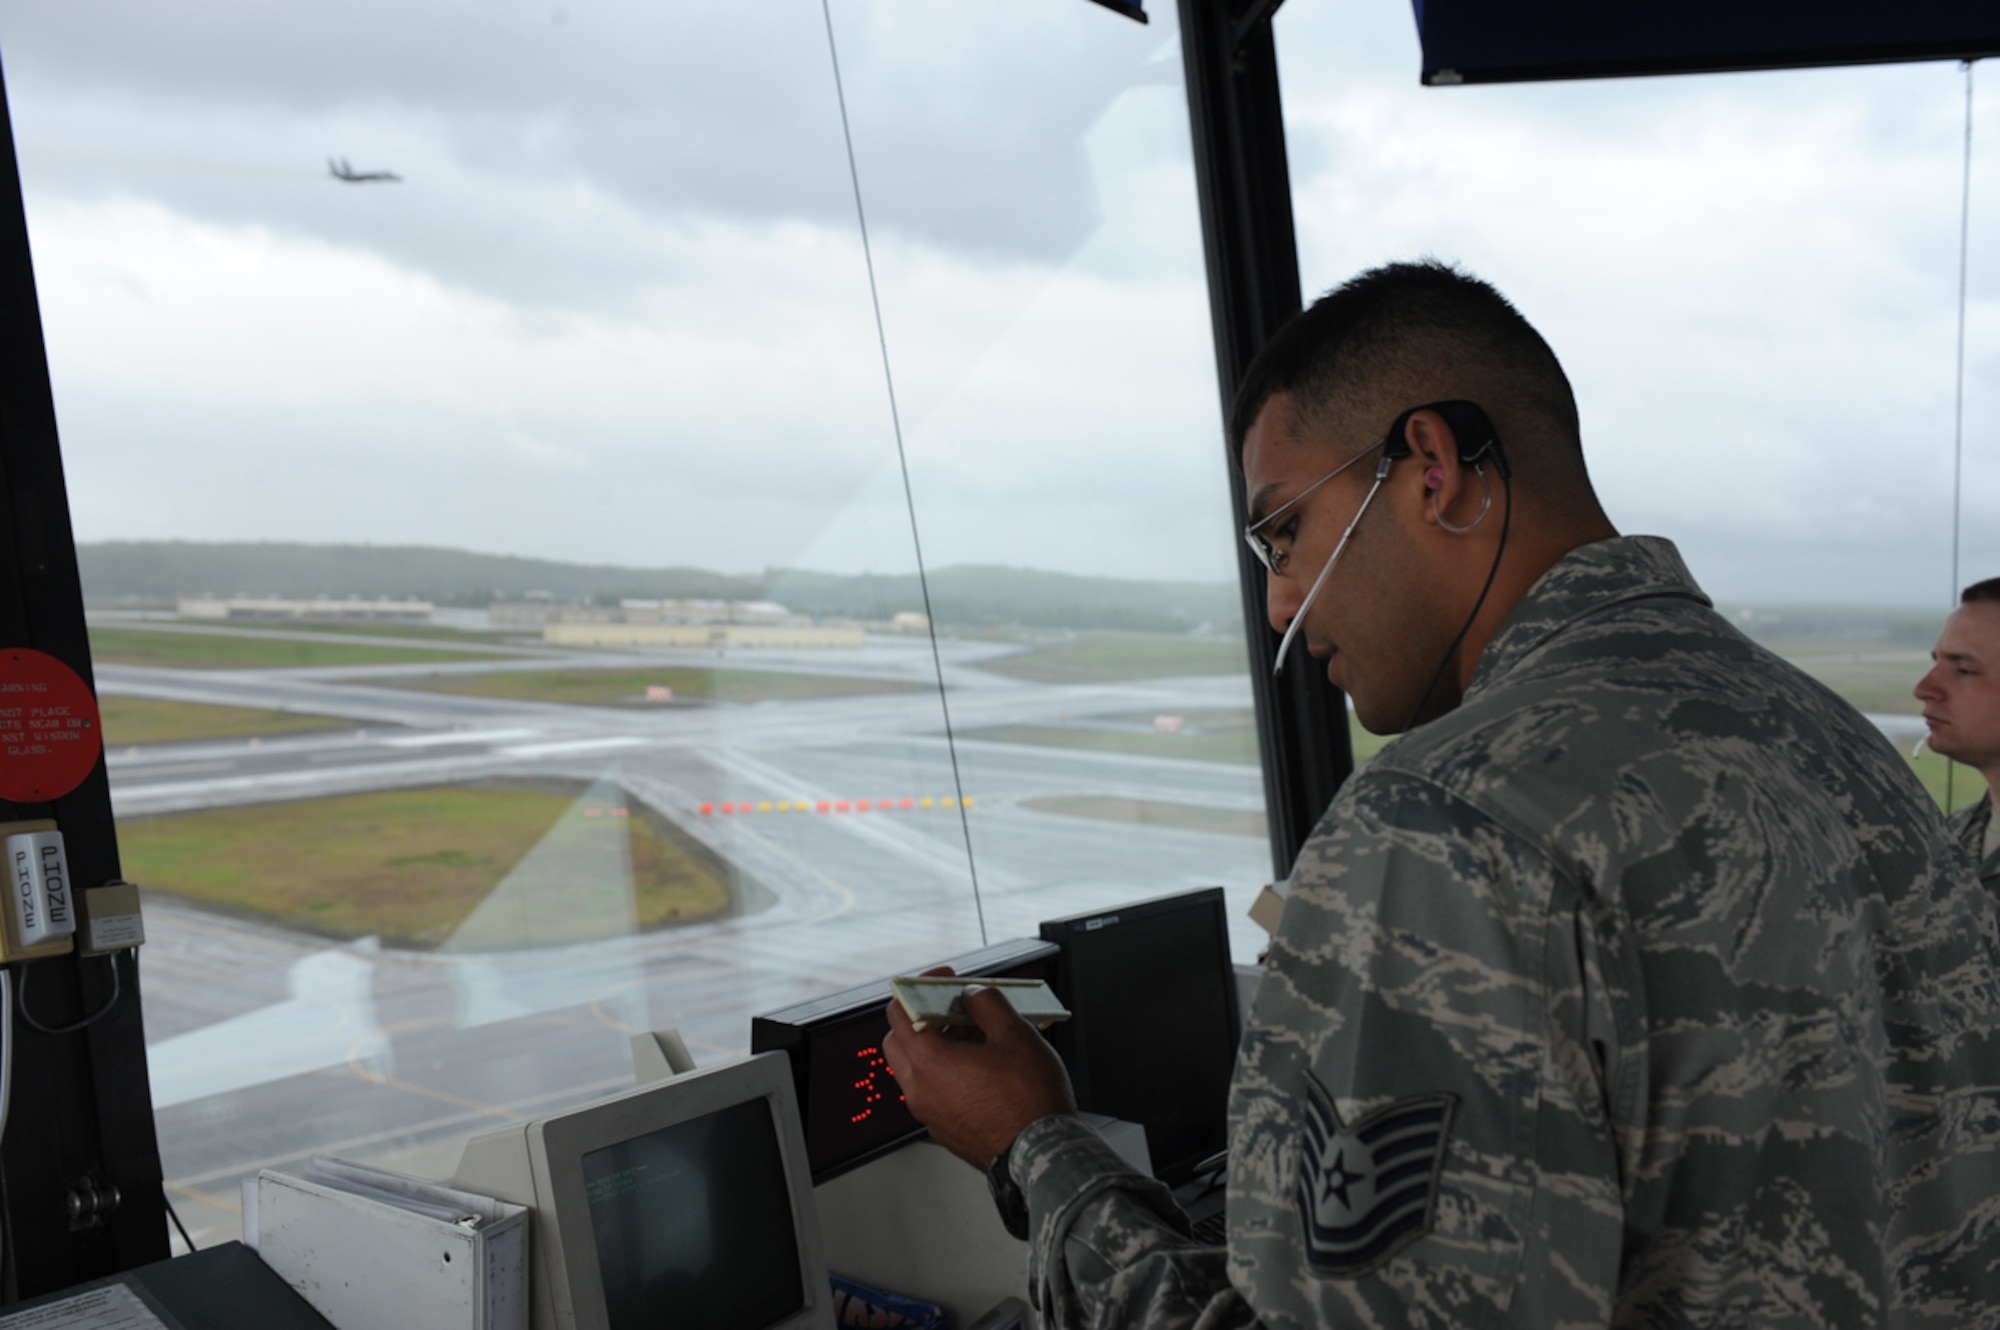 Air Force Tech. Sgt. Jorge Riviera, air traffic controller, issues flight clearances for fighter jets preparing to launch for in support of Exercise Northern Edge 11 in Joint Base Elmendorf-Richardson, Alaska, June 14. Northern Edge, Alaska's largest military training exercise, is designed to prepare joint forces to respond to crises throughout the Asia-Pacific region. (Photo by Mass Communication Specialist 2nd Class Rufus Hucks)